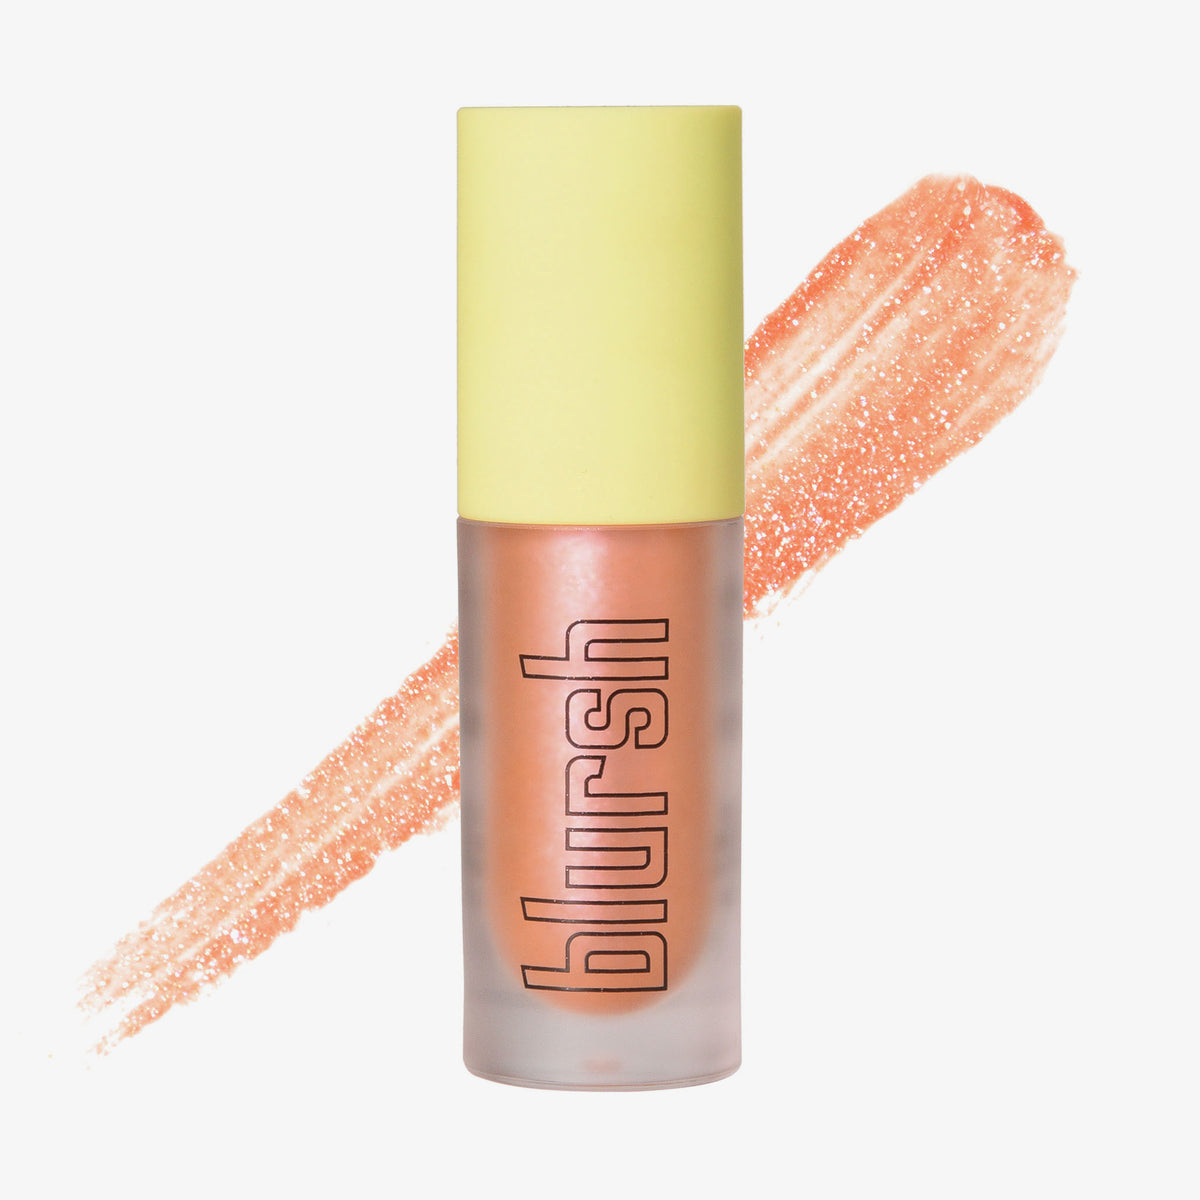 Made by Mitchell | Made by Mitchell | Blursh Lights A Chance of Peach